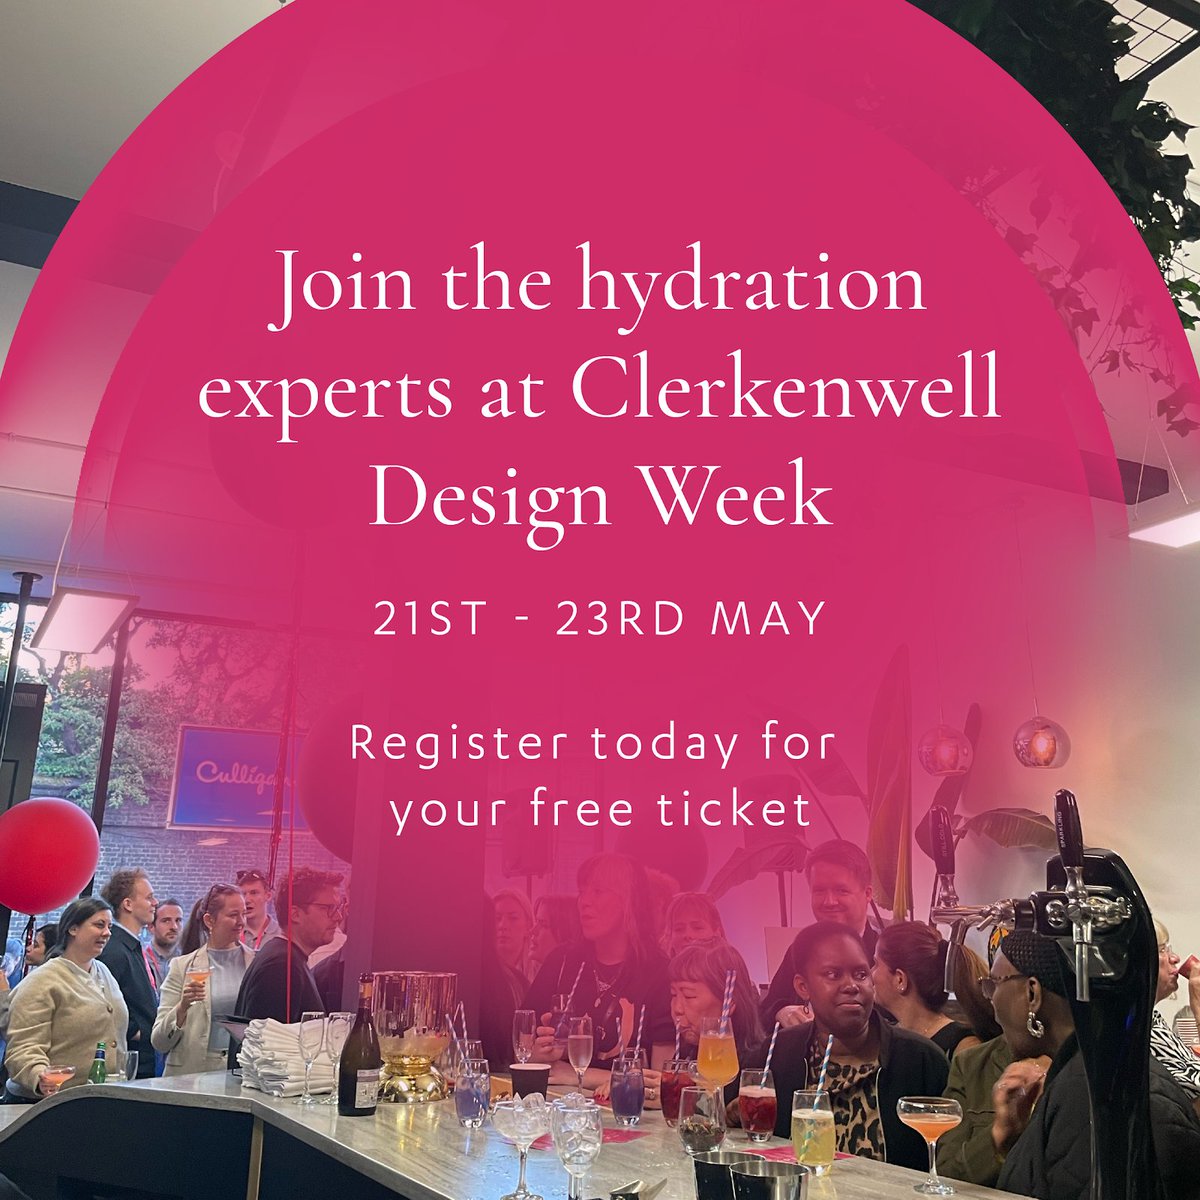 Join us for three days of innovation, fun, and prizes next week at Clerkenwell Design Week (@CDWfestival)!🎊 Our showroom will be abuzz with excitement, featuring everything from HydroTap demonstrations, including our latest HydroTap Celsius Plus All-in-One Pull-Out model, to